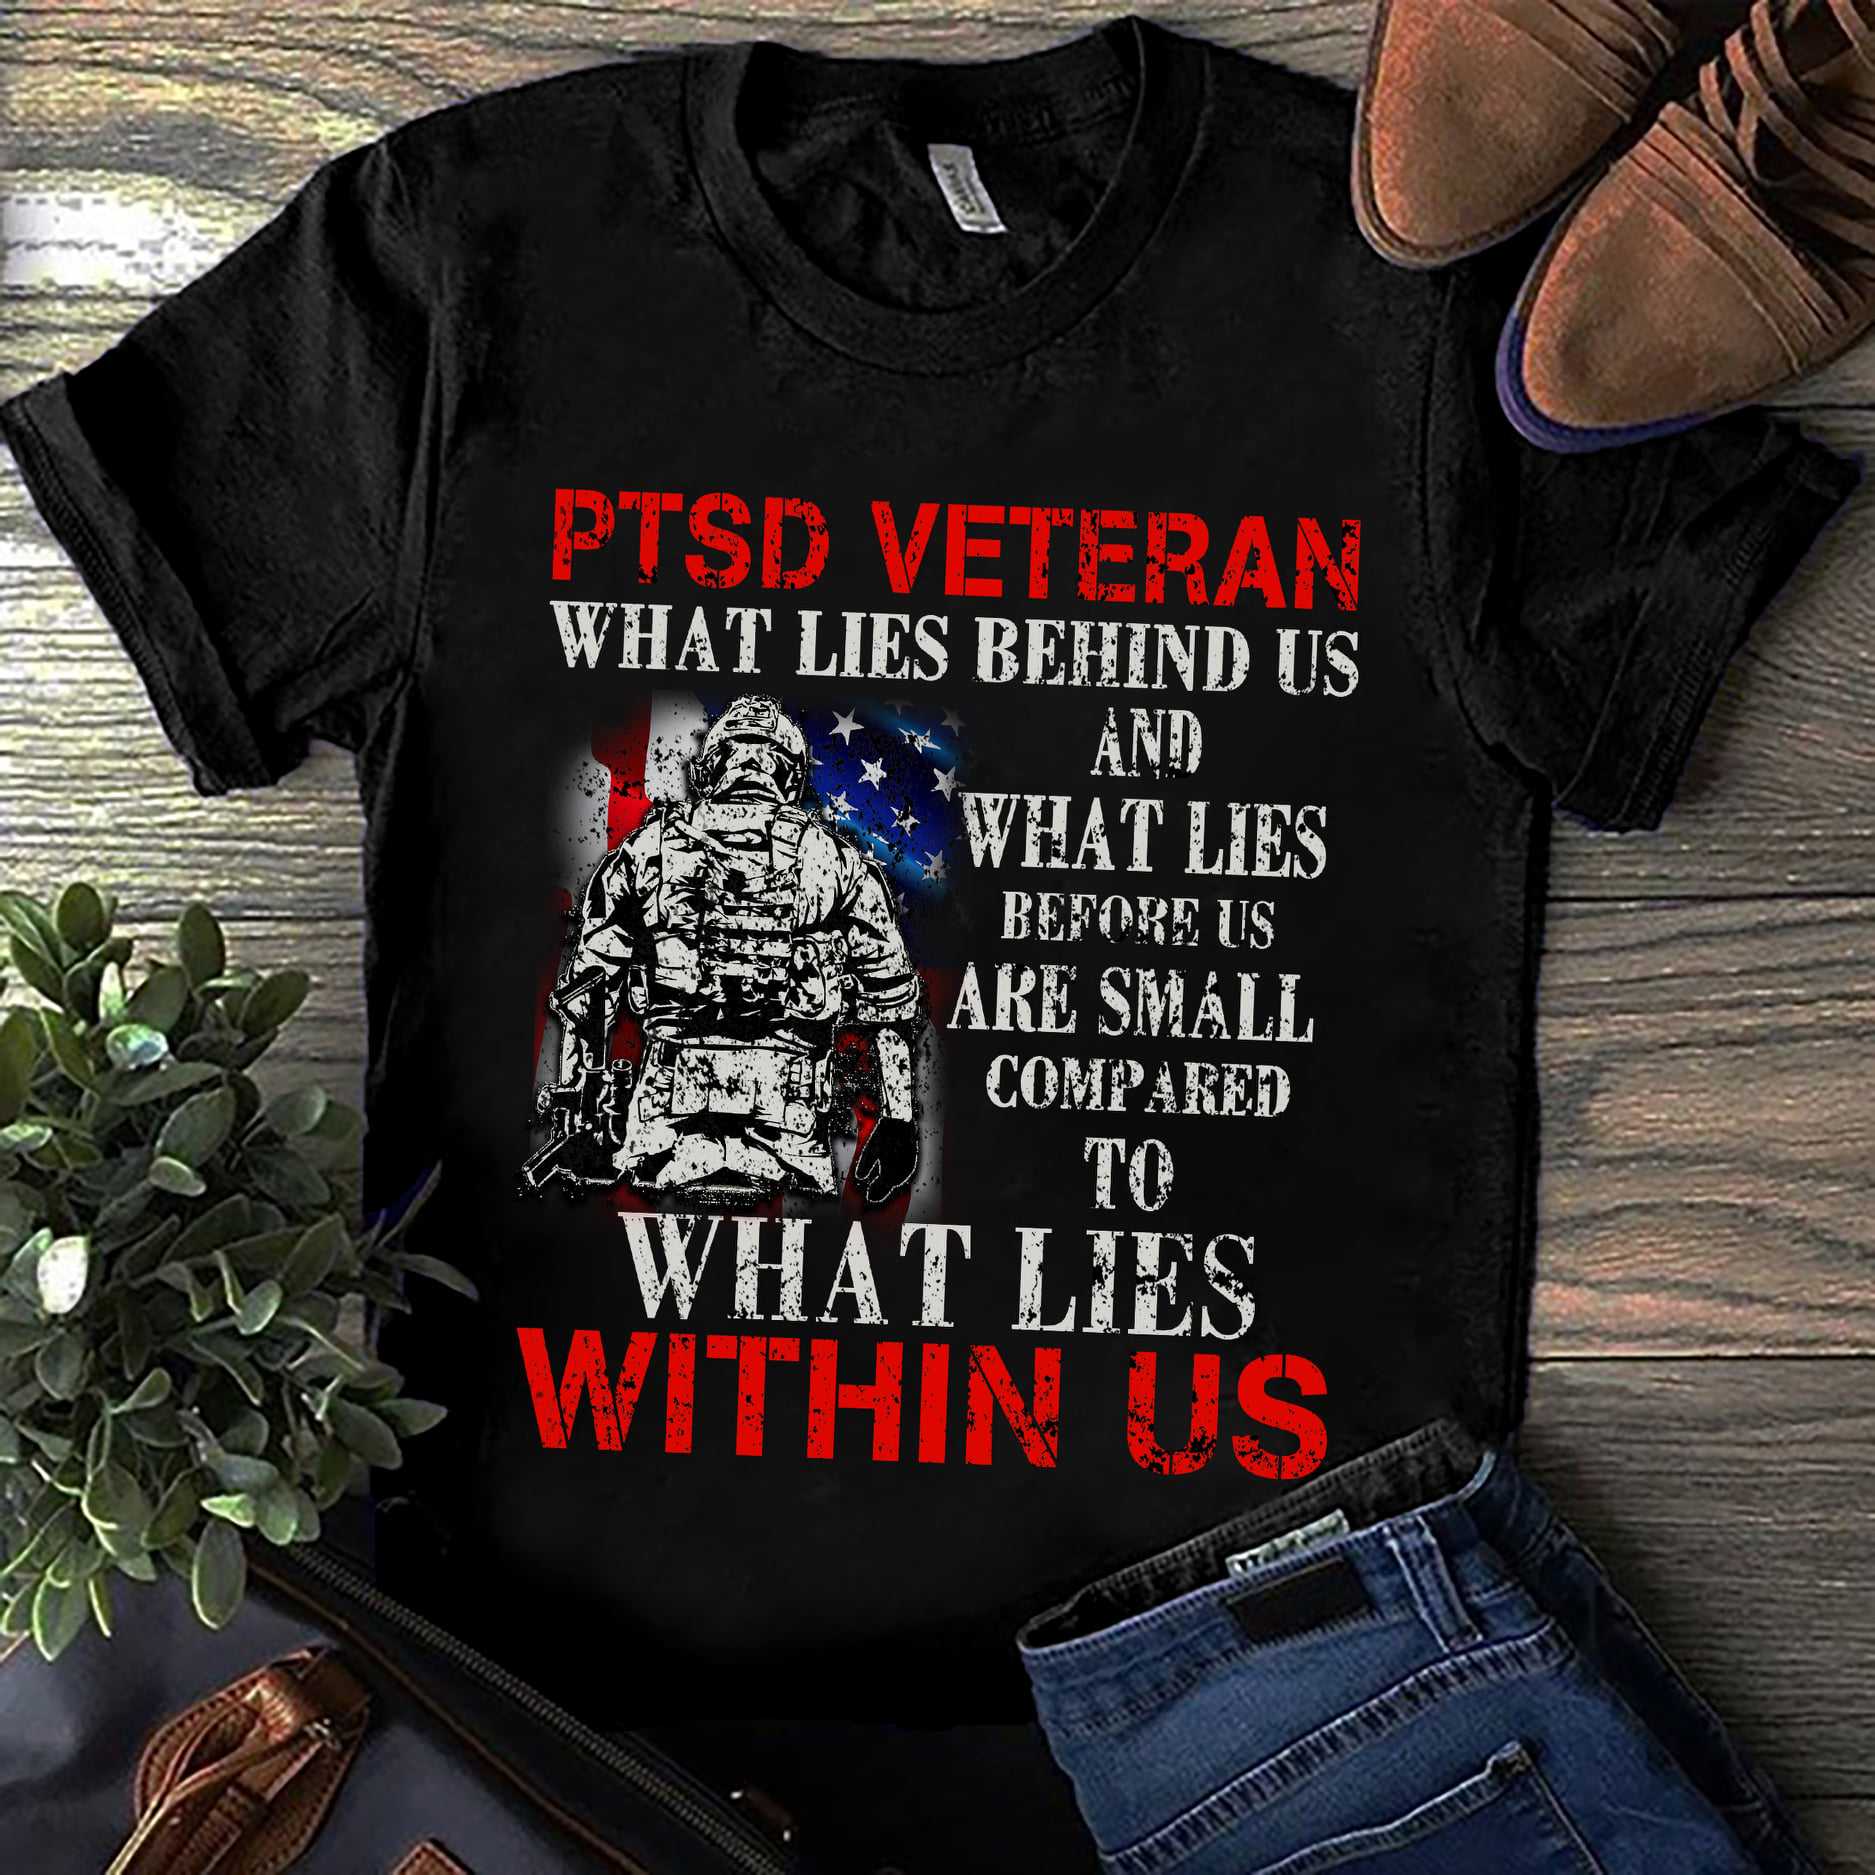 PTSD Veteran what lies behind us and what lies before us are small compared to what lies within us